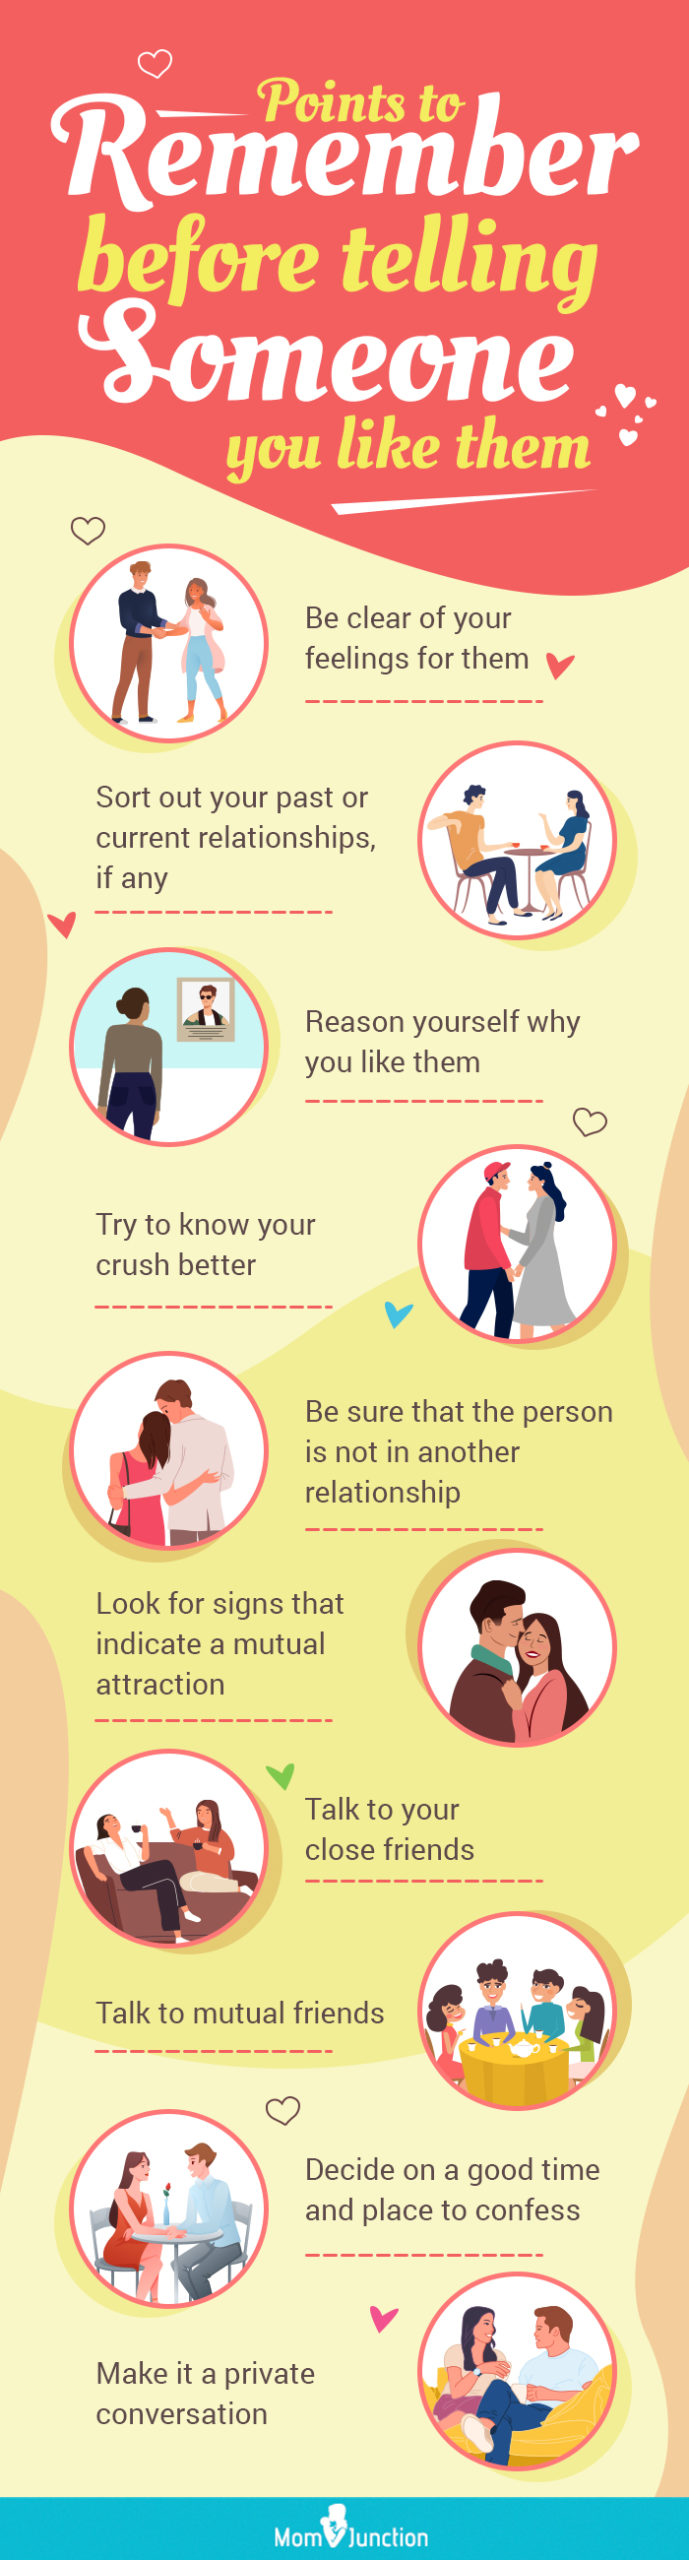 points to remember before telling someone you like them [infographic]